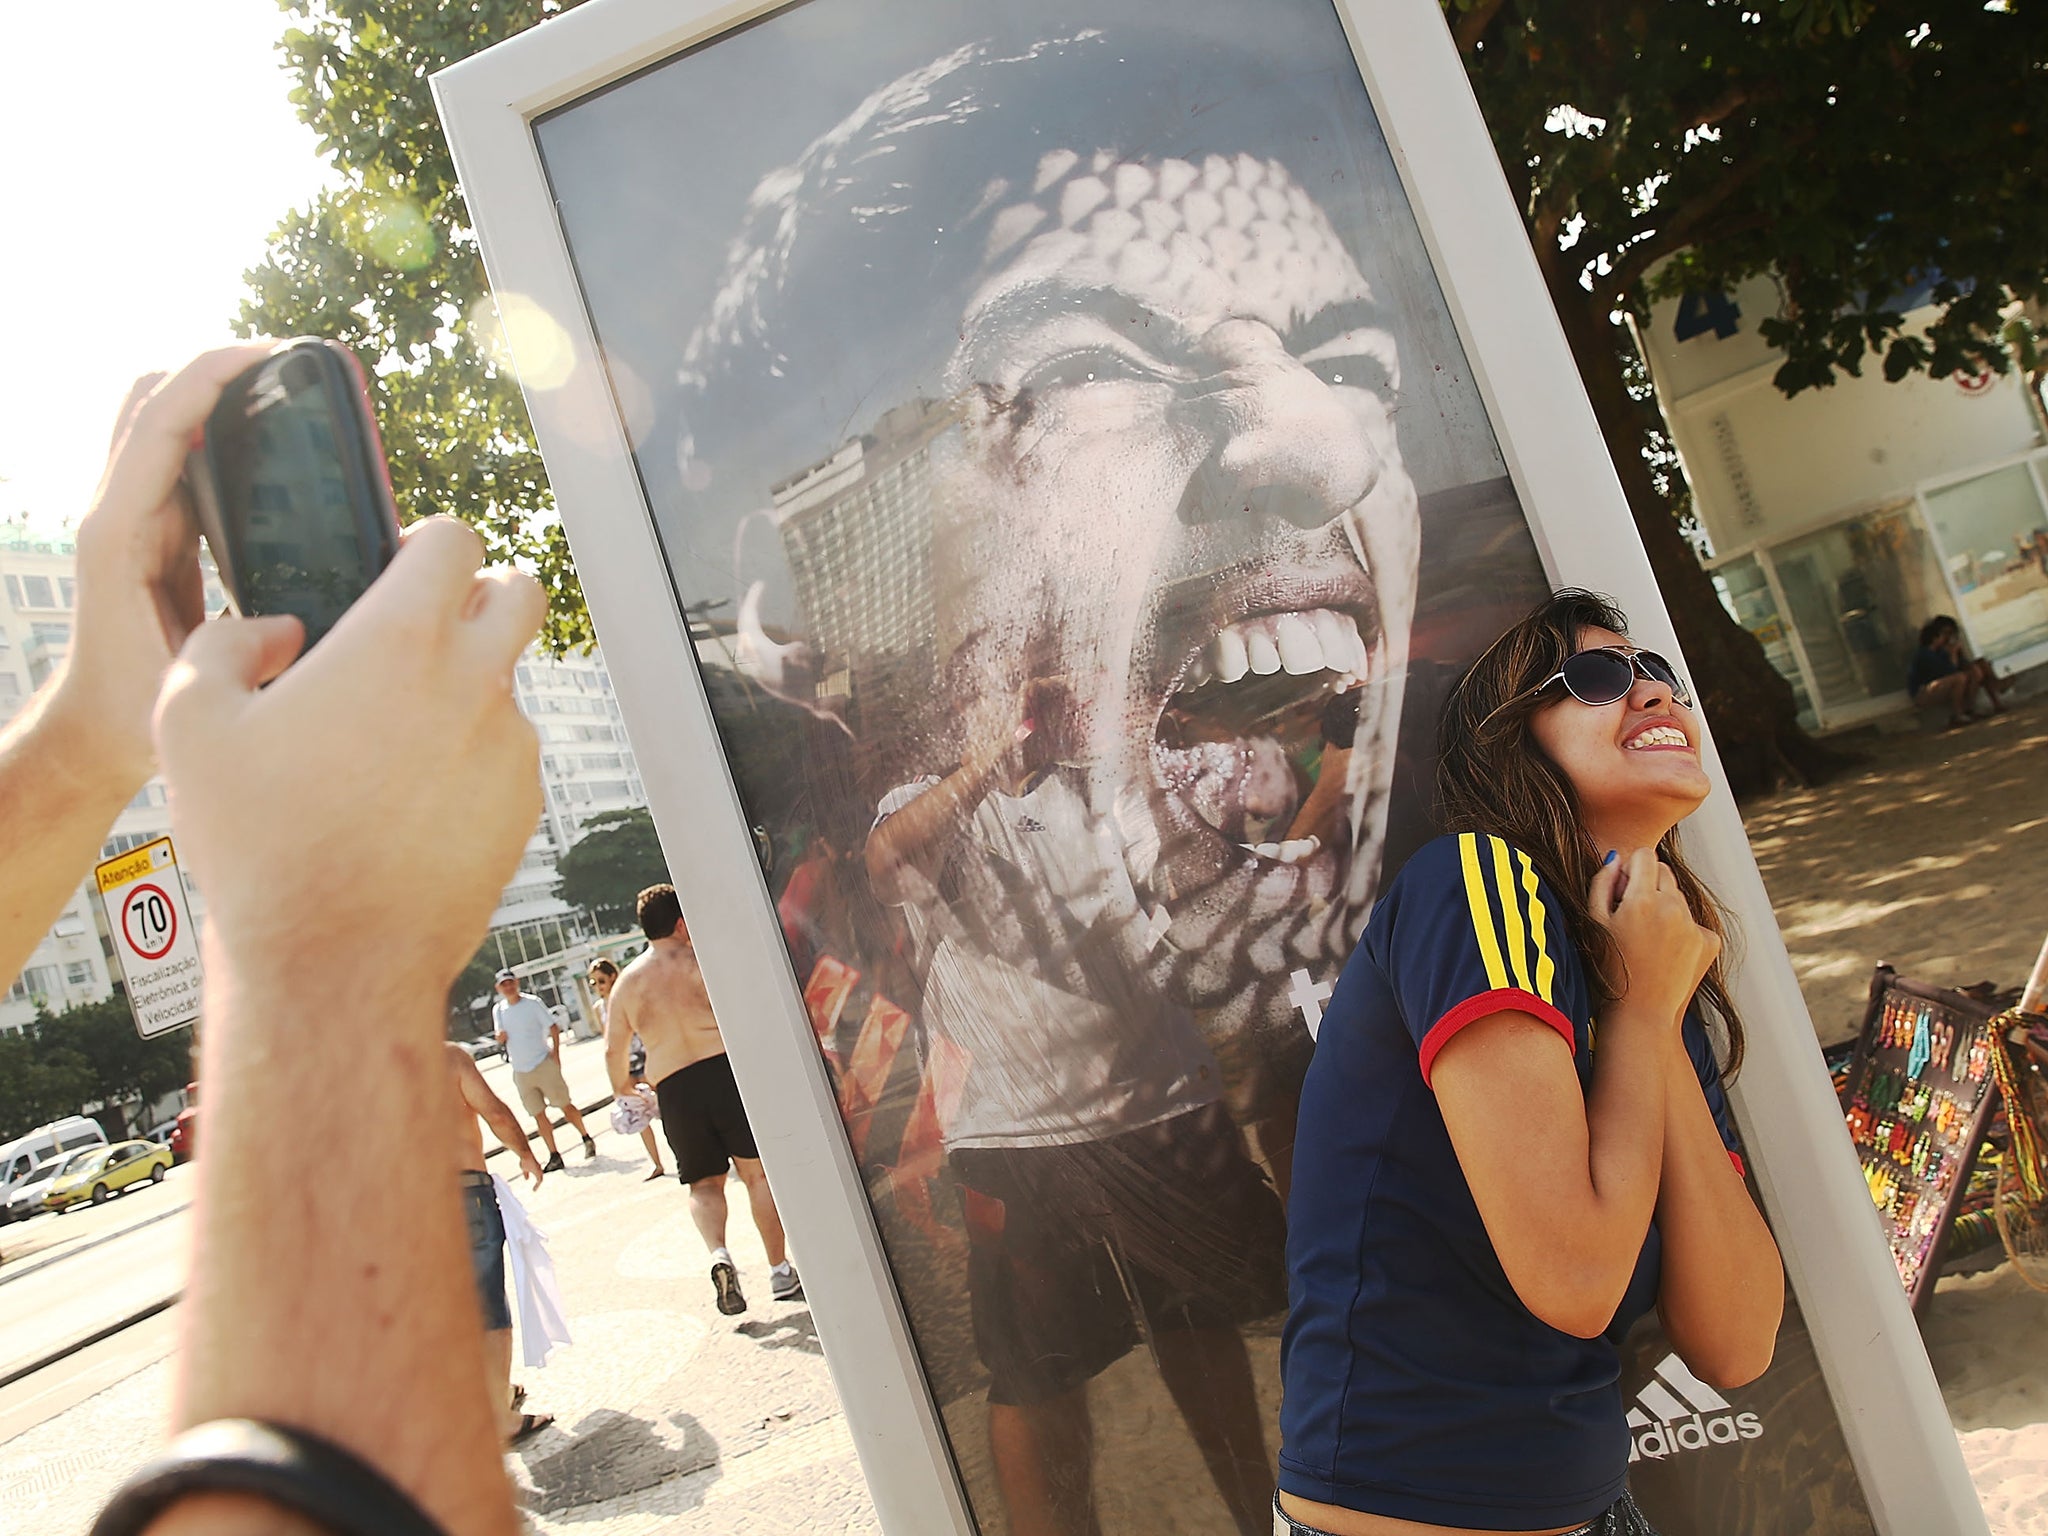 A woman takes a photo next to an advertisement featuring Uruguay's Luis Suarez, mocking the biting incident